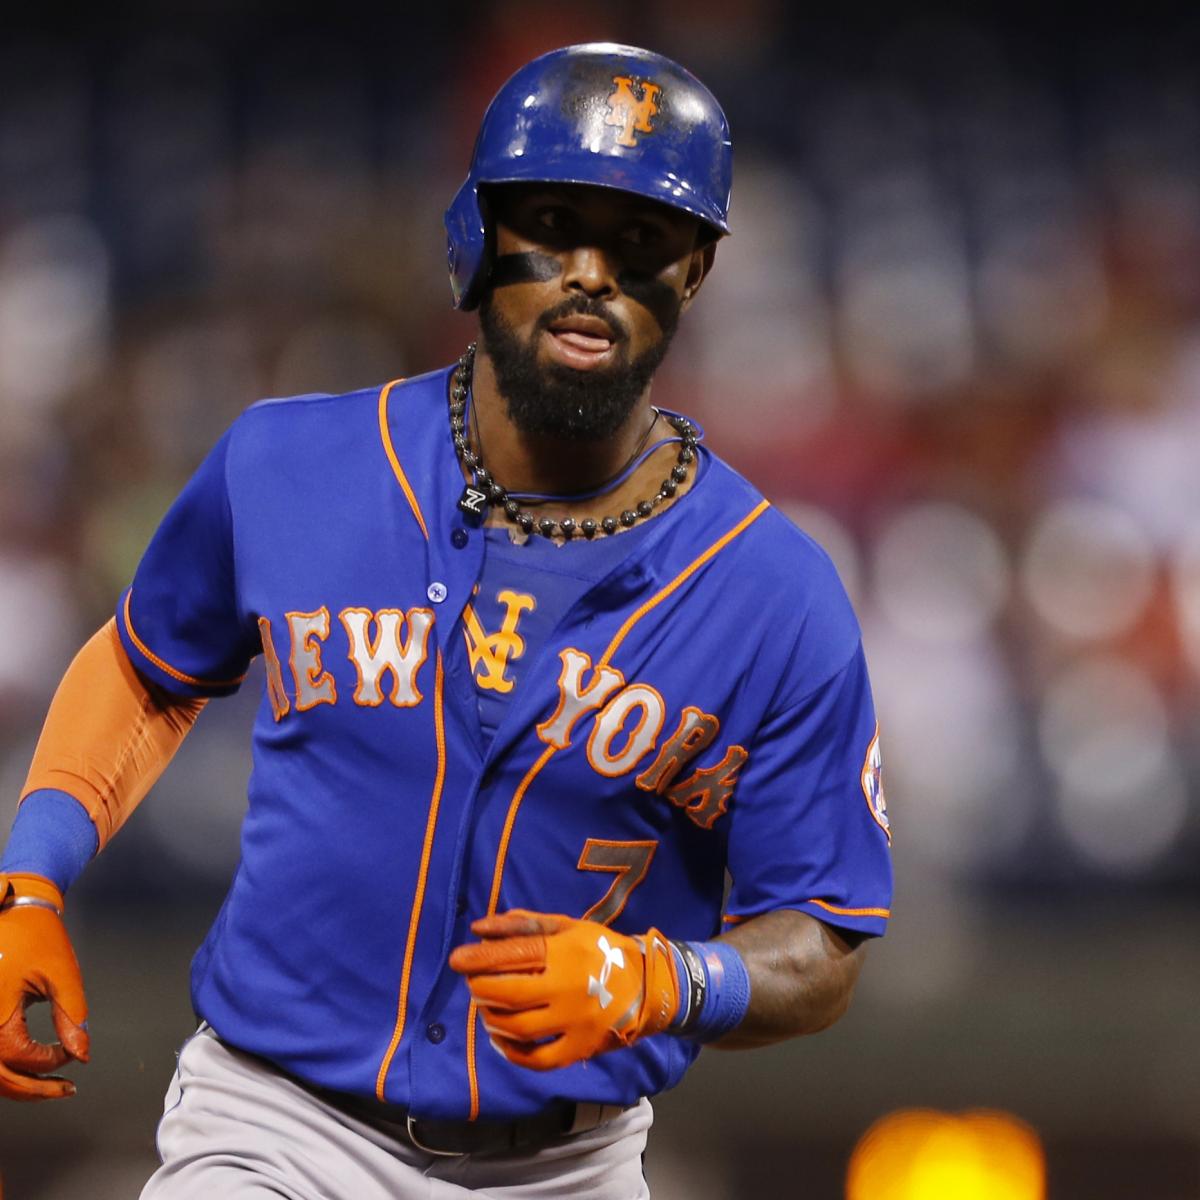 Remember when José Reyes (left) played for the Mets? : r/baseball